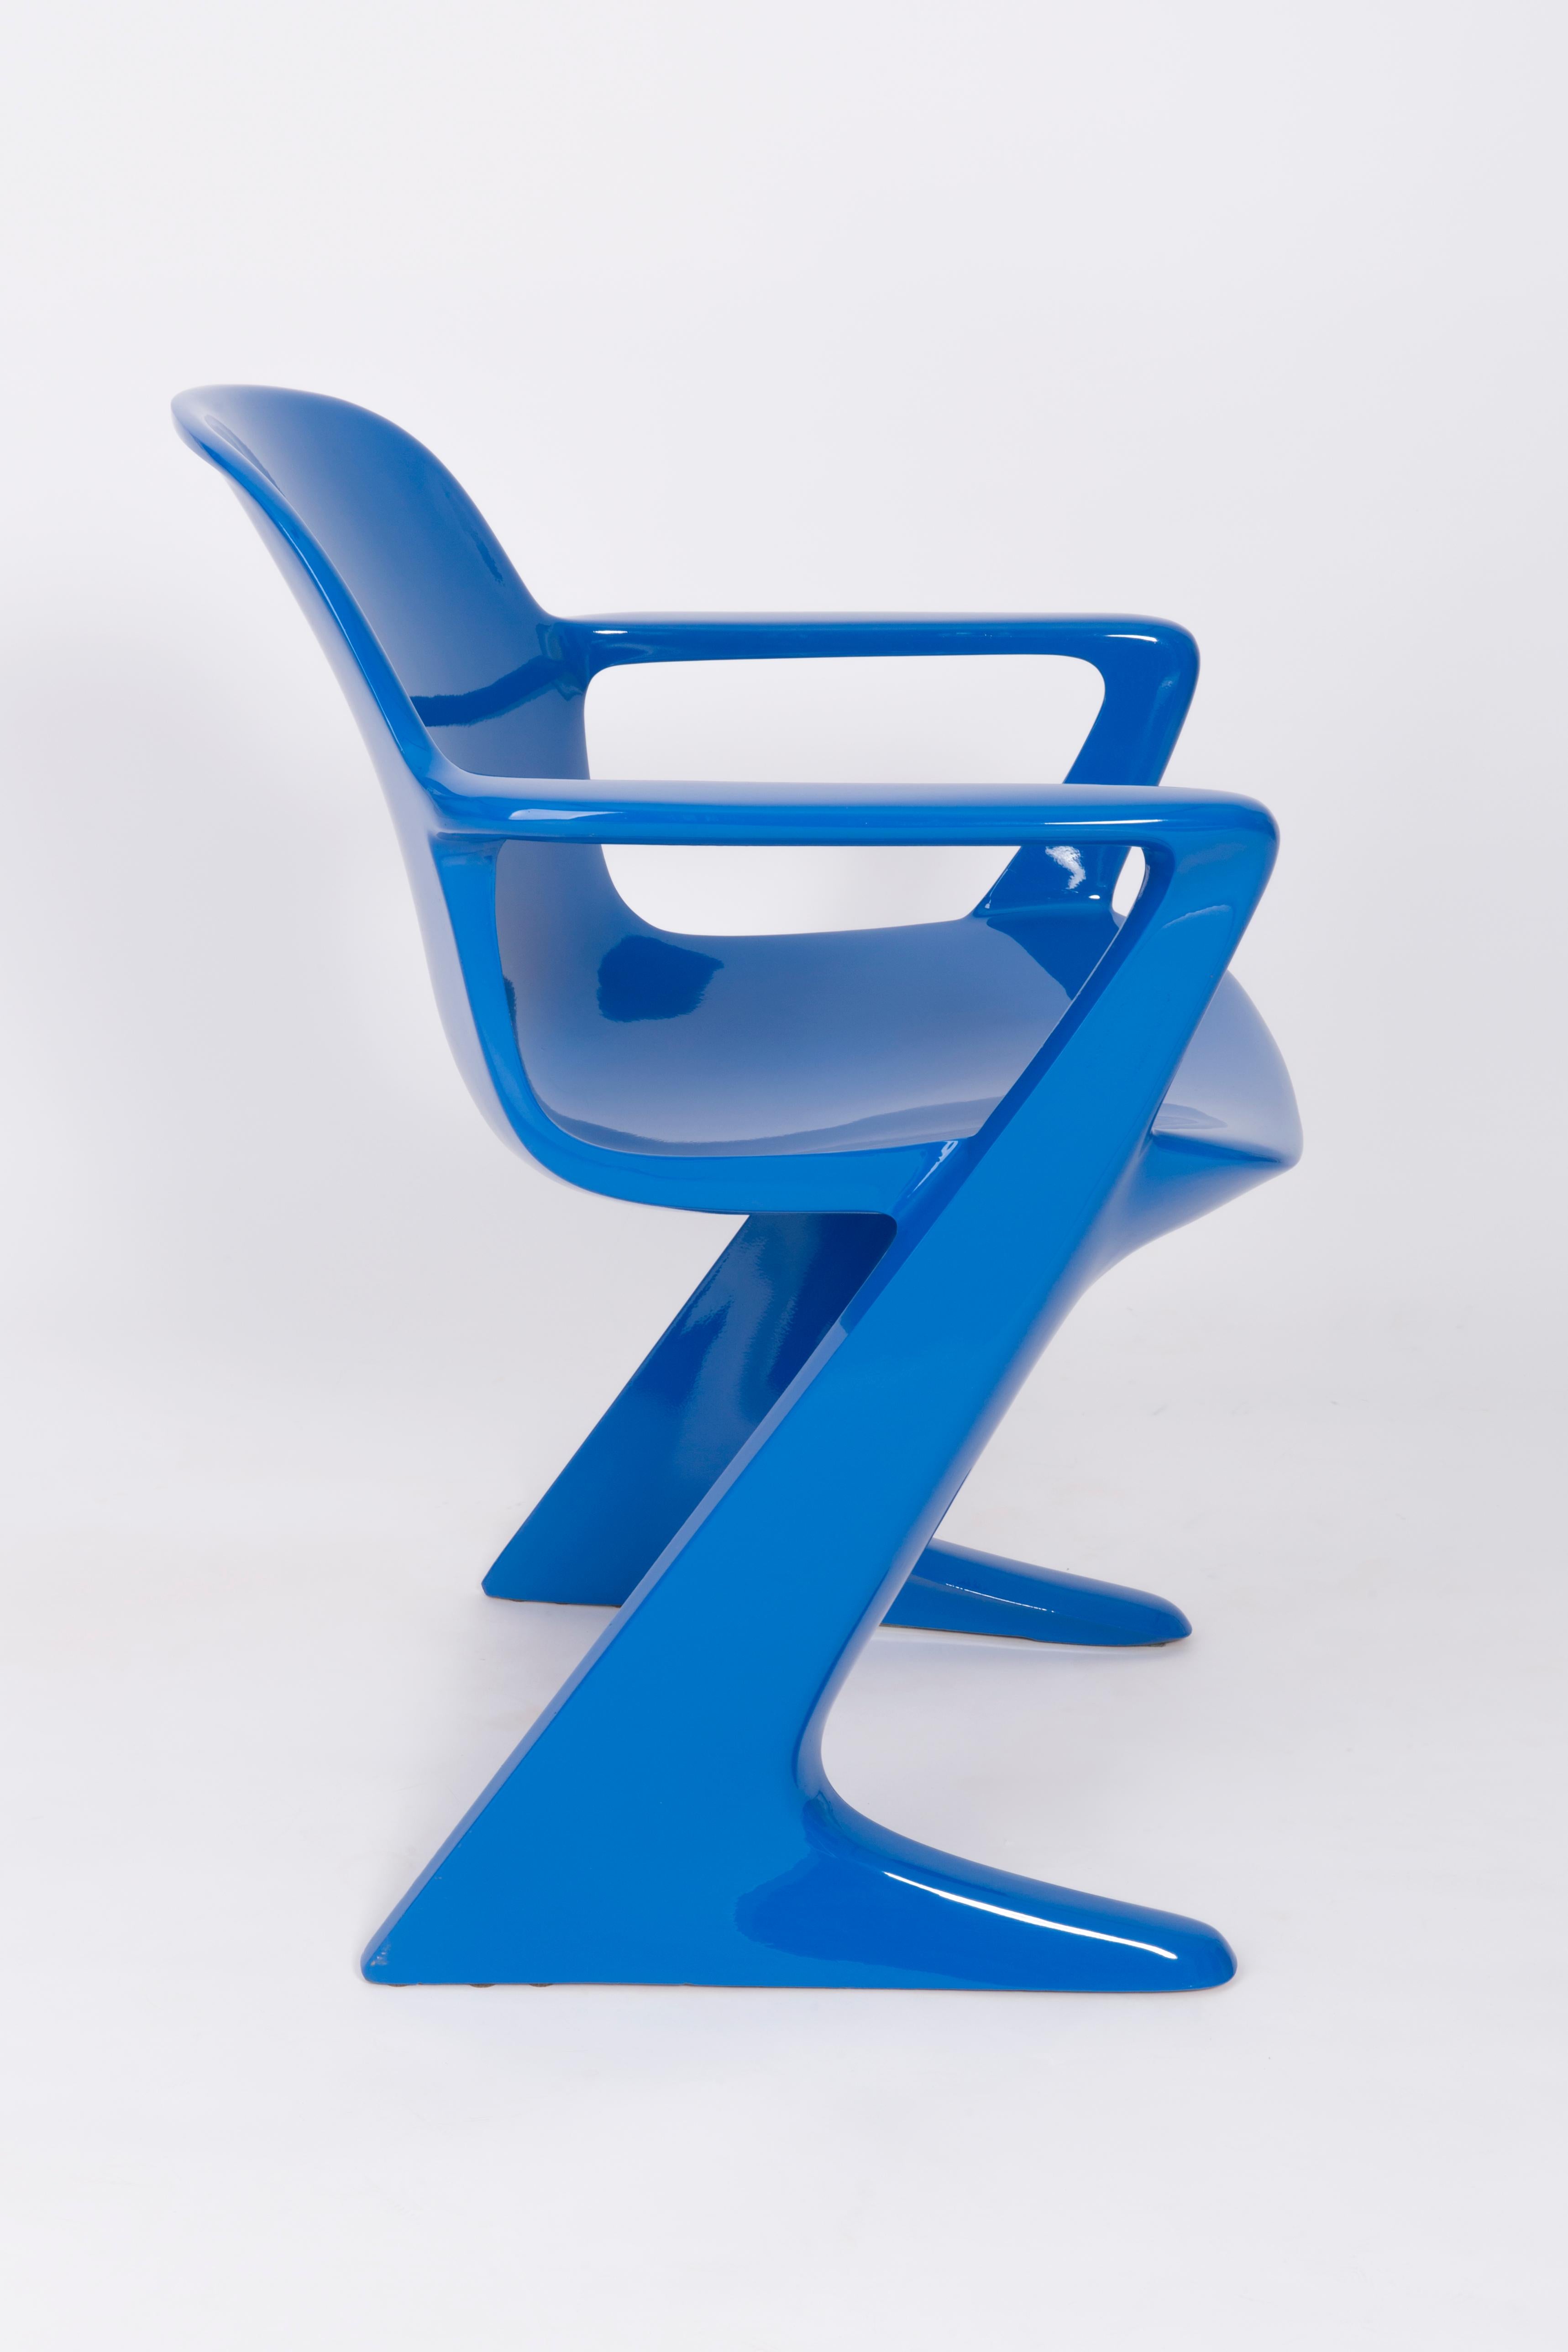 Fiberglass Set of Two Classic Blue Kangaroo Chairs Designed by Ernst Moeckl, Germany, 1968 For Sale